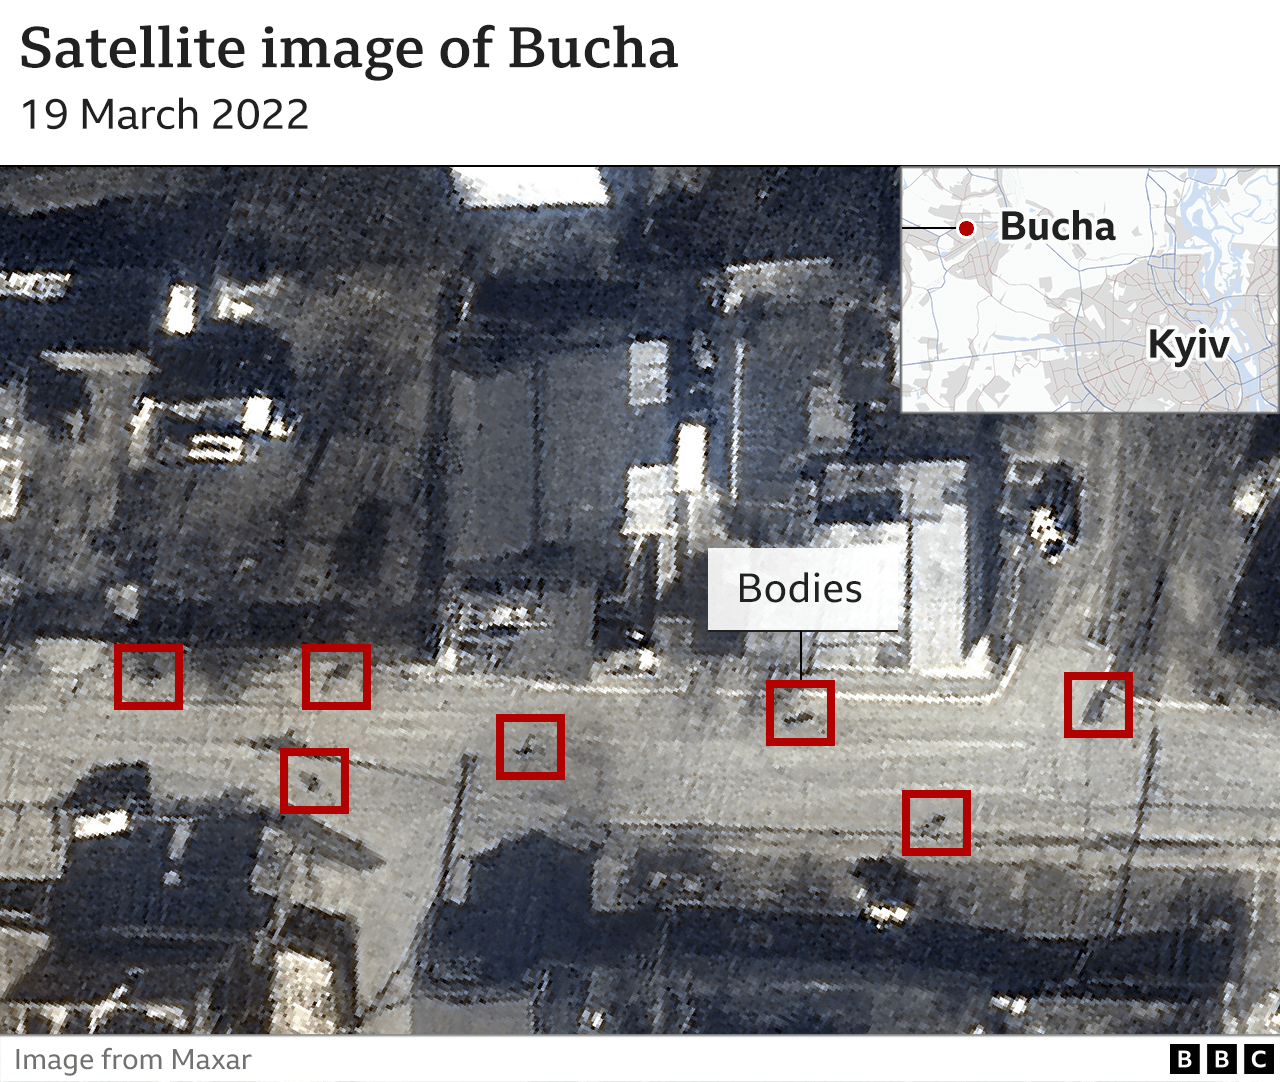 Black objects which appear to be the same size as human bodies remained in the same position on the same street in Bucha for some weeks